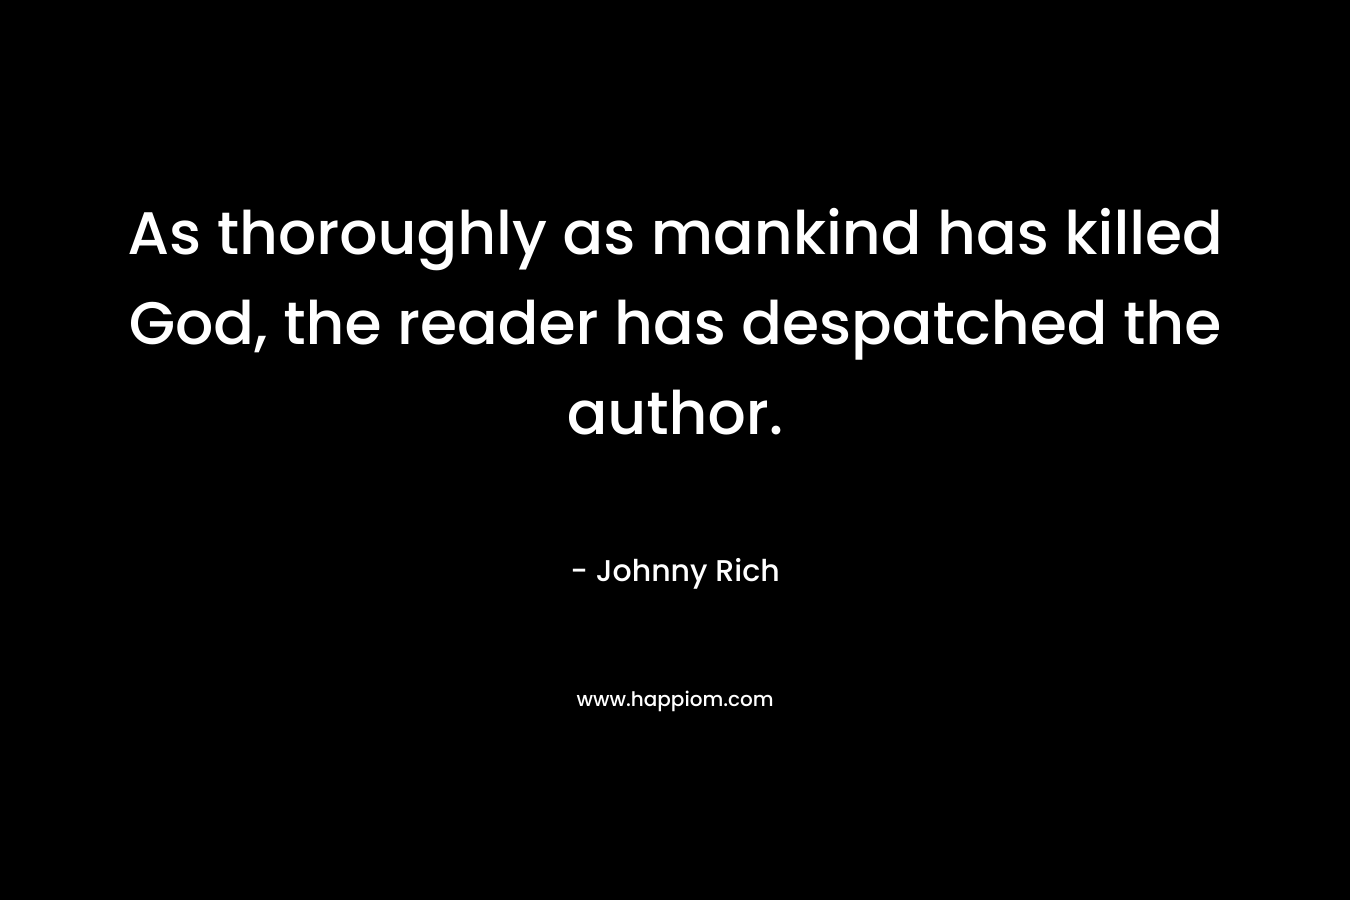 As thoroughly as mankind has killed God, the reader has despatched the author.